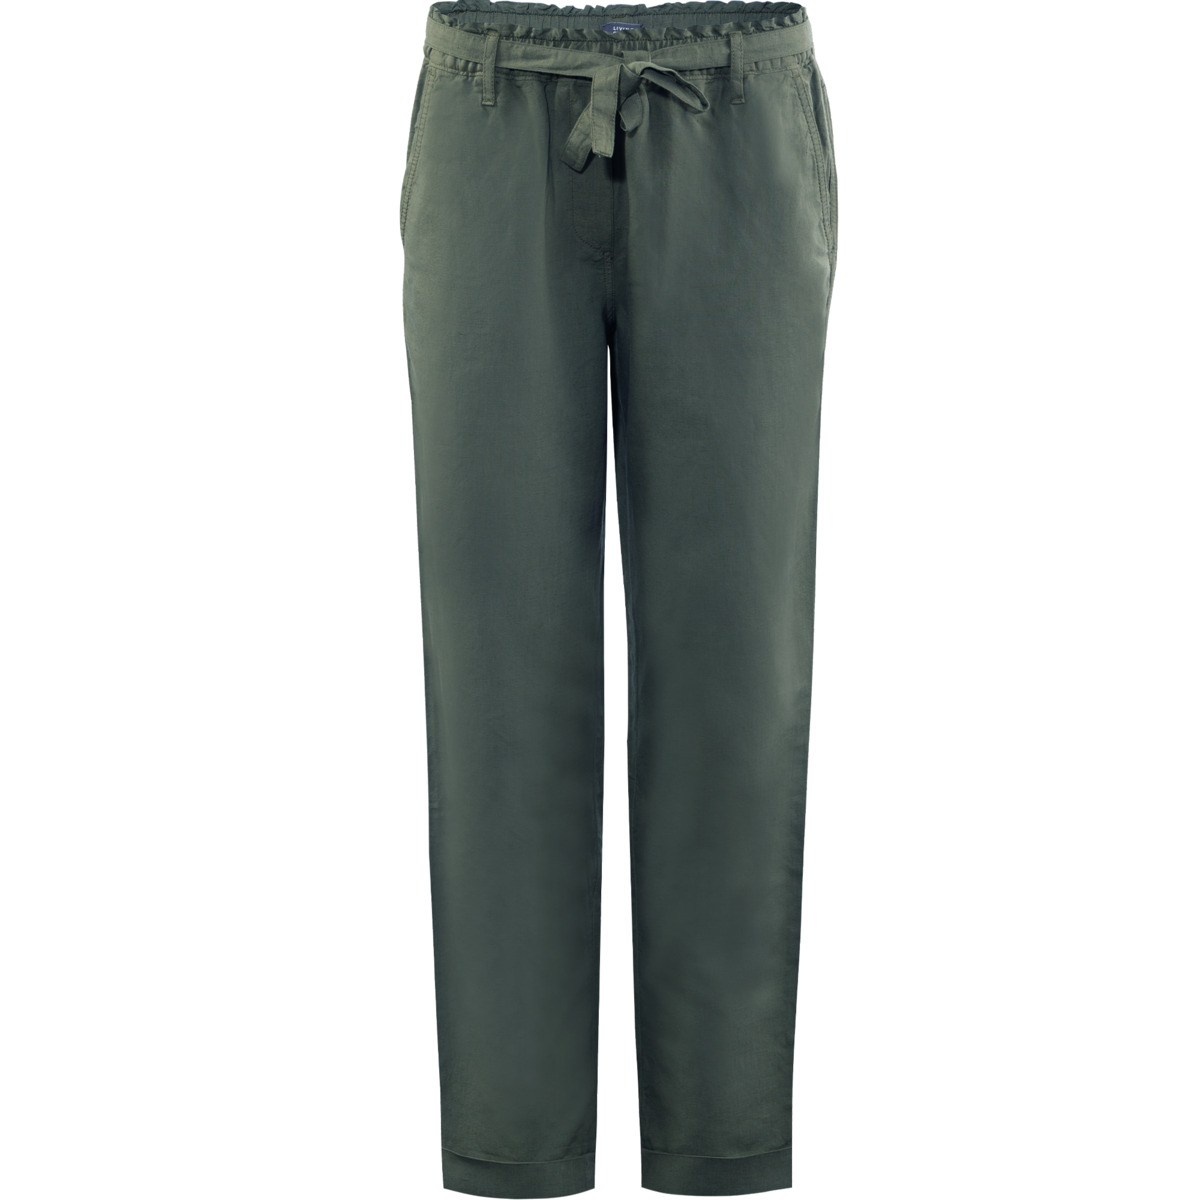 Green Trousers, GILL